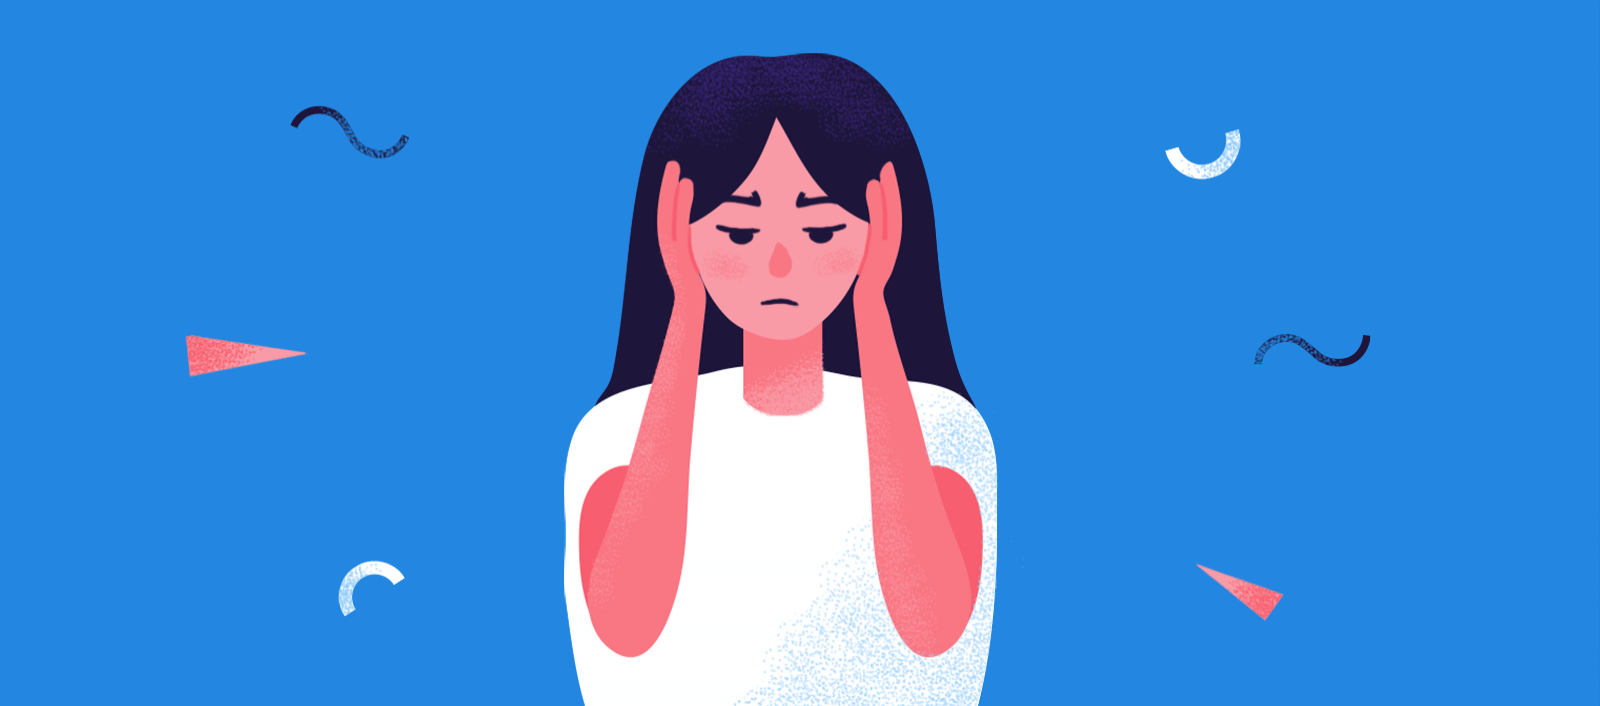 Buzzing Sensations From Anxiety: Symptoms, Causes, and Solutions That Work